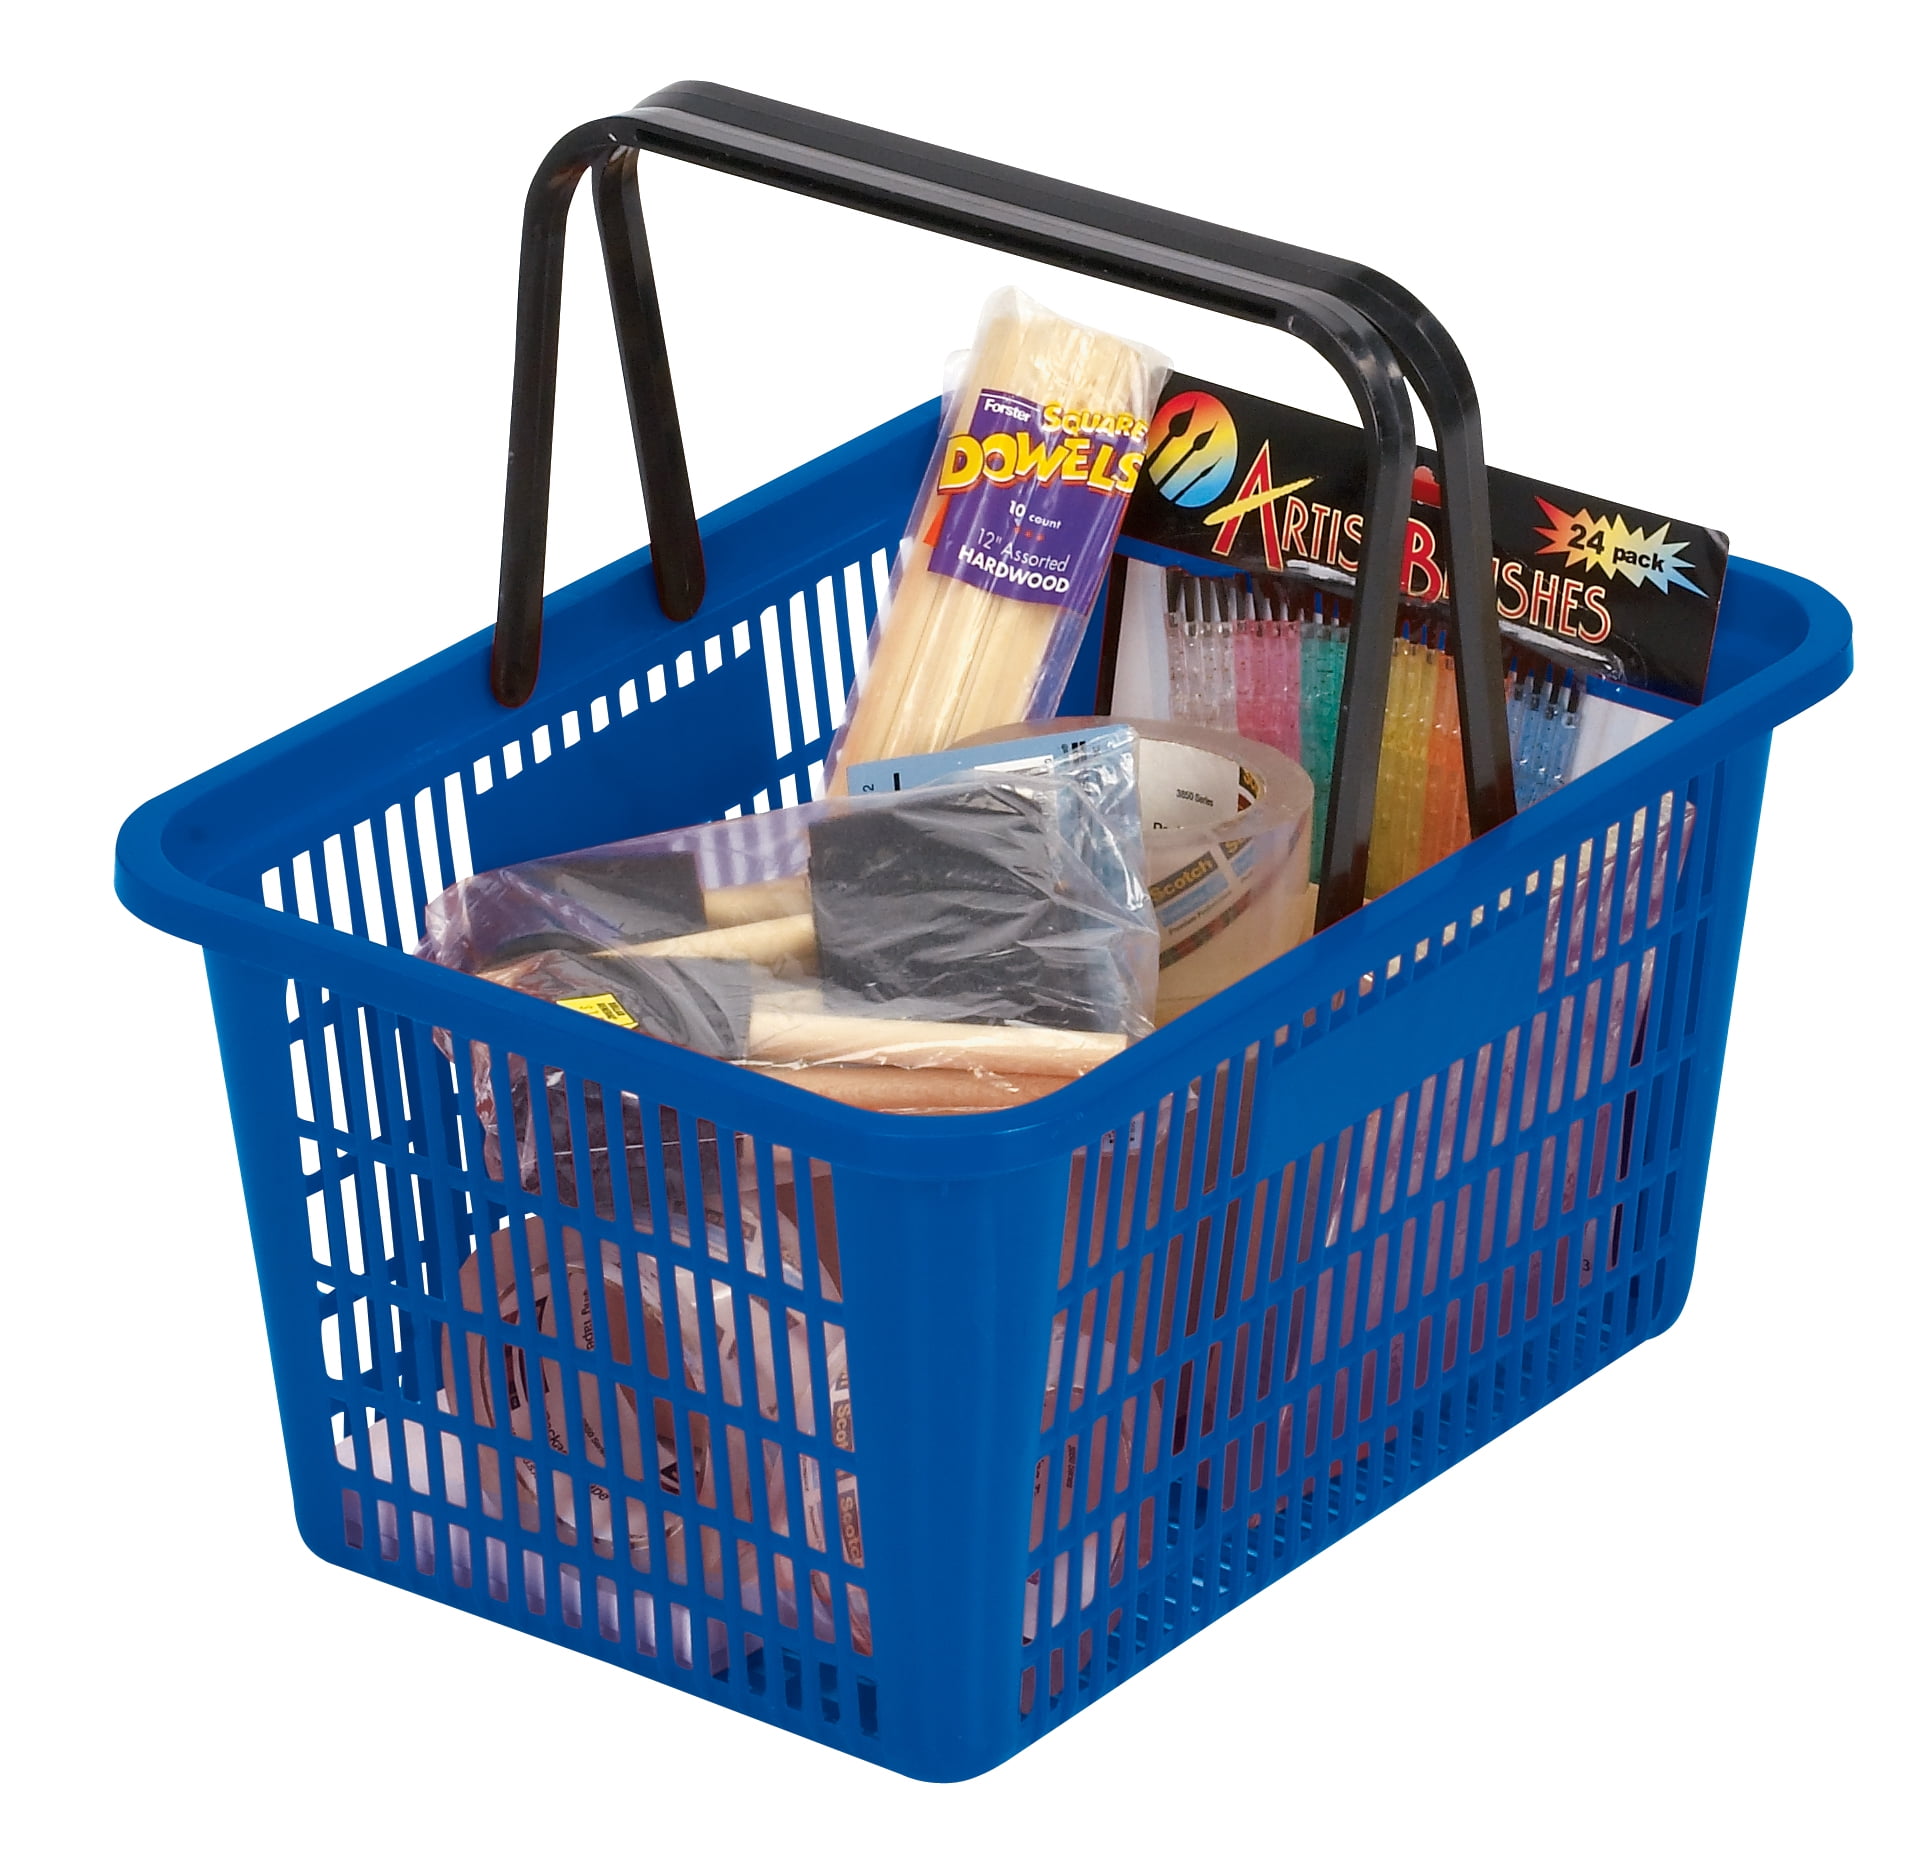 Colorful Basket Package